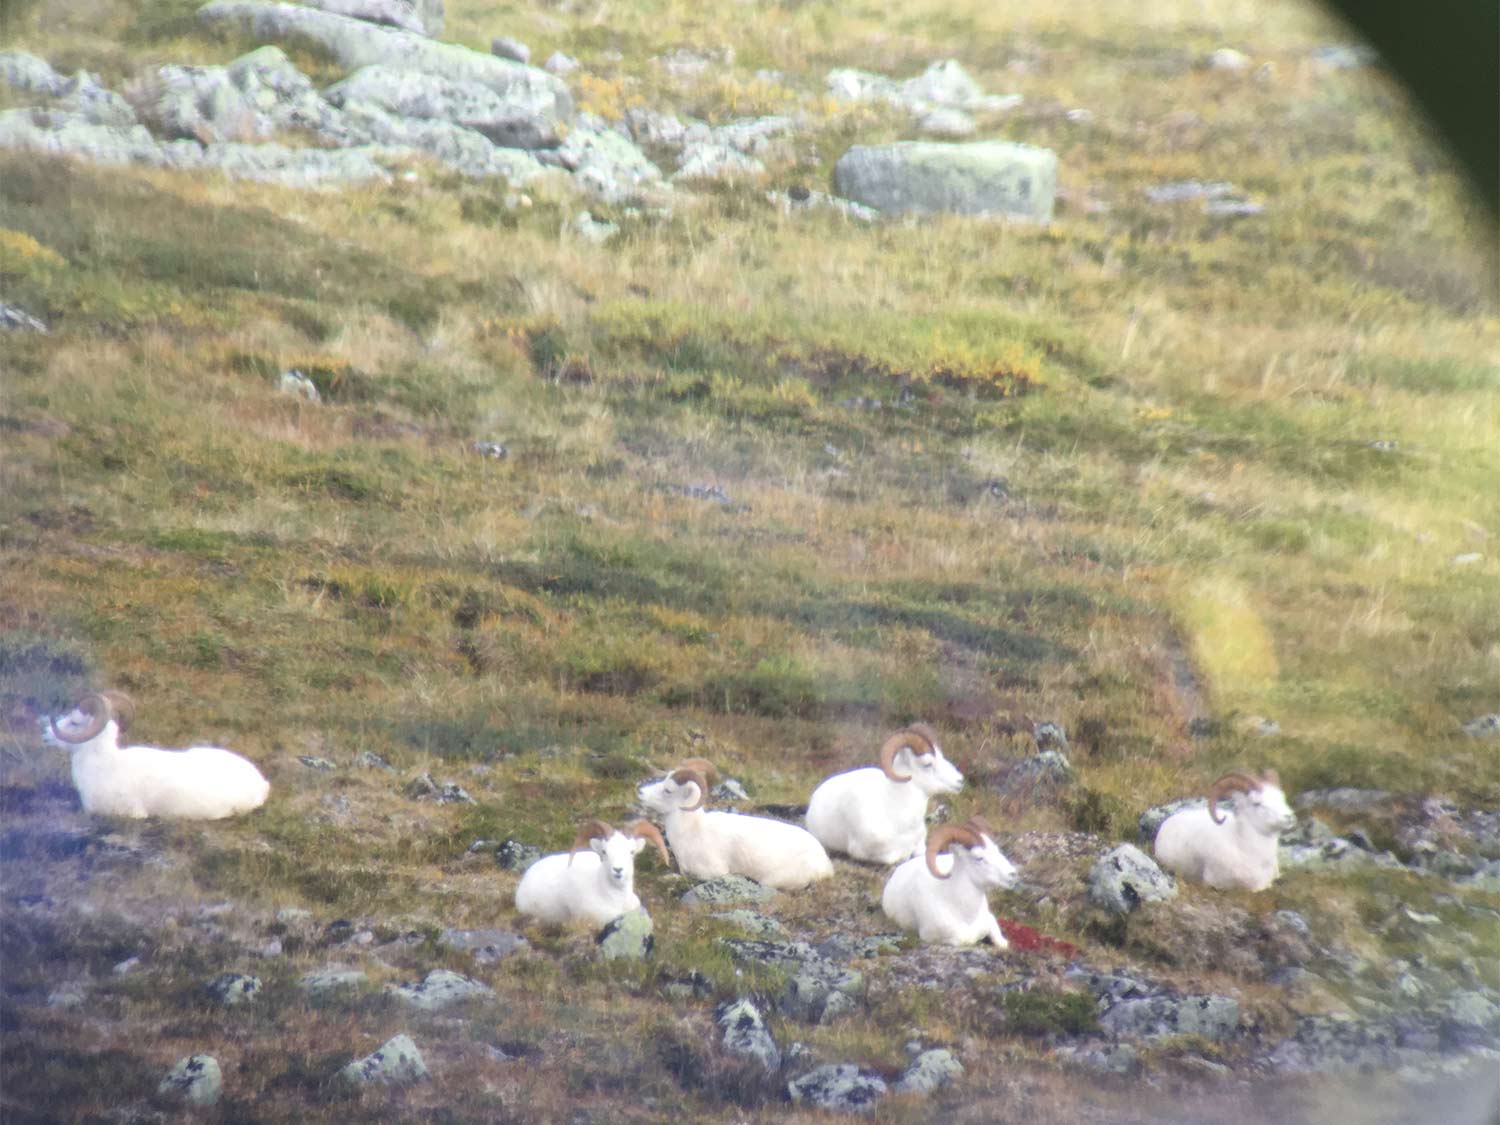 A herd of dall sheep standing on a hillside.